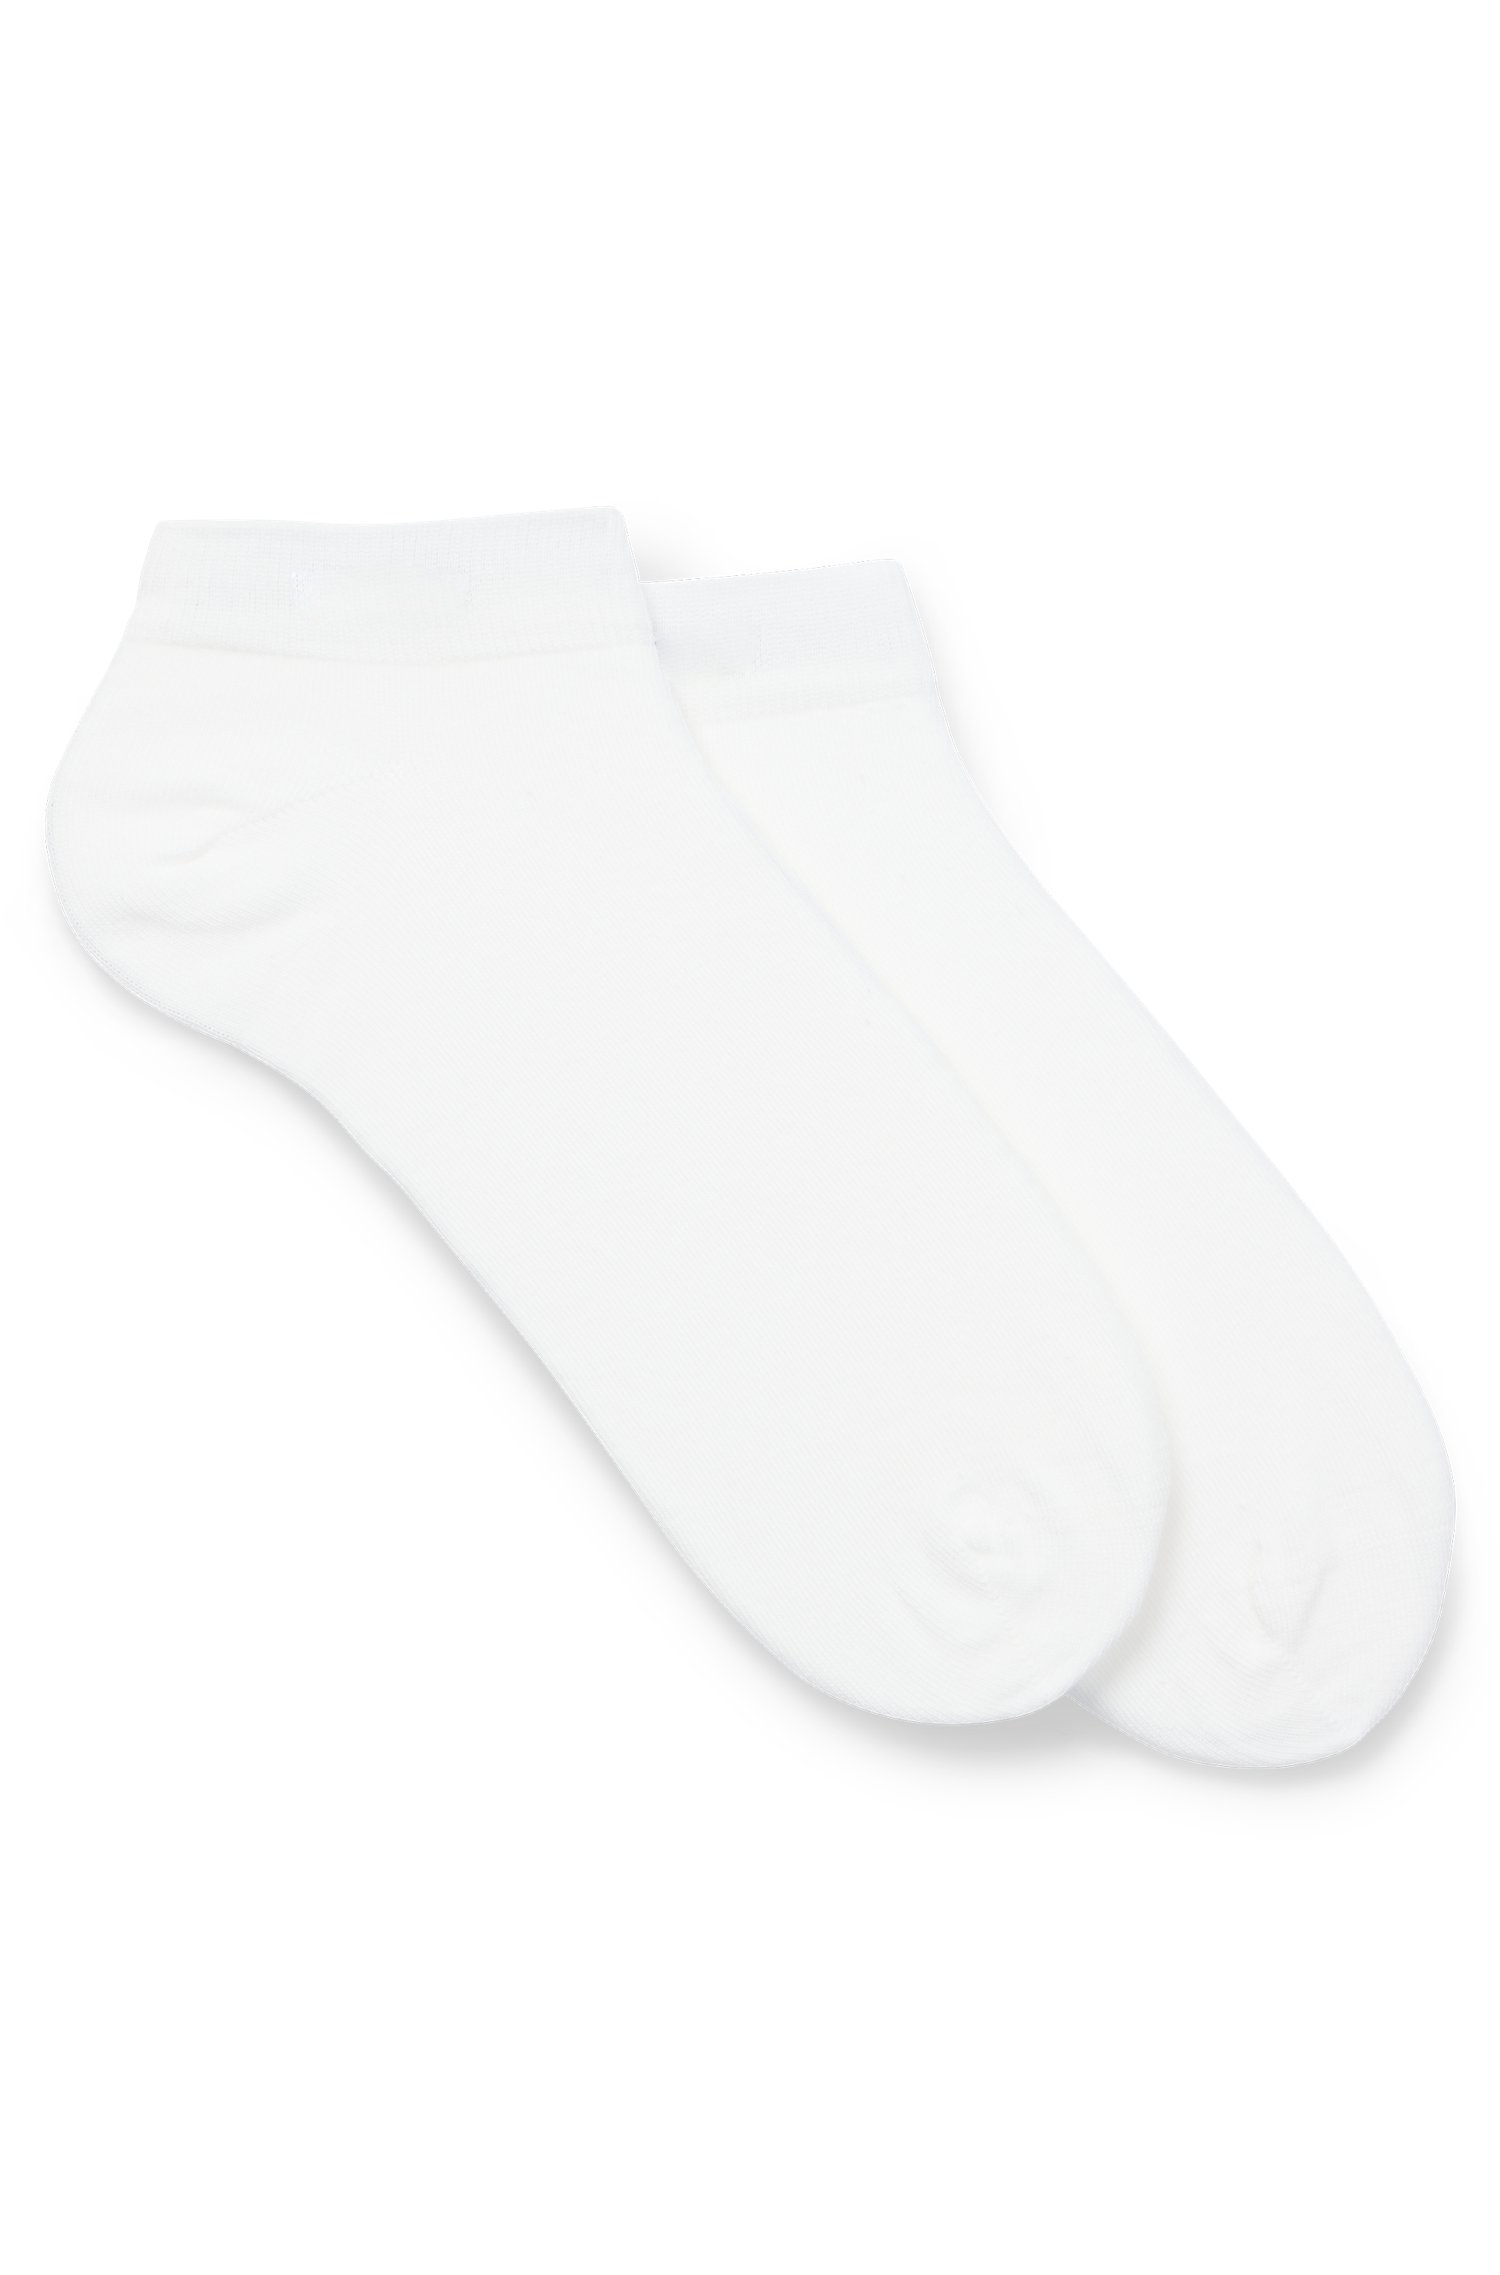 Ankle Socks in a Cotton Blend Stretchable